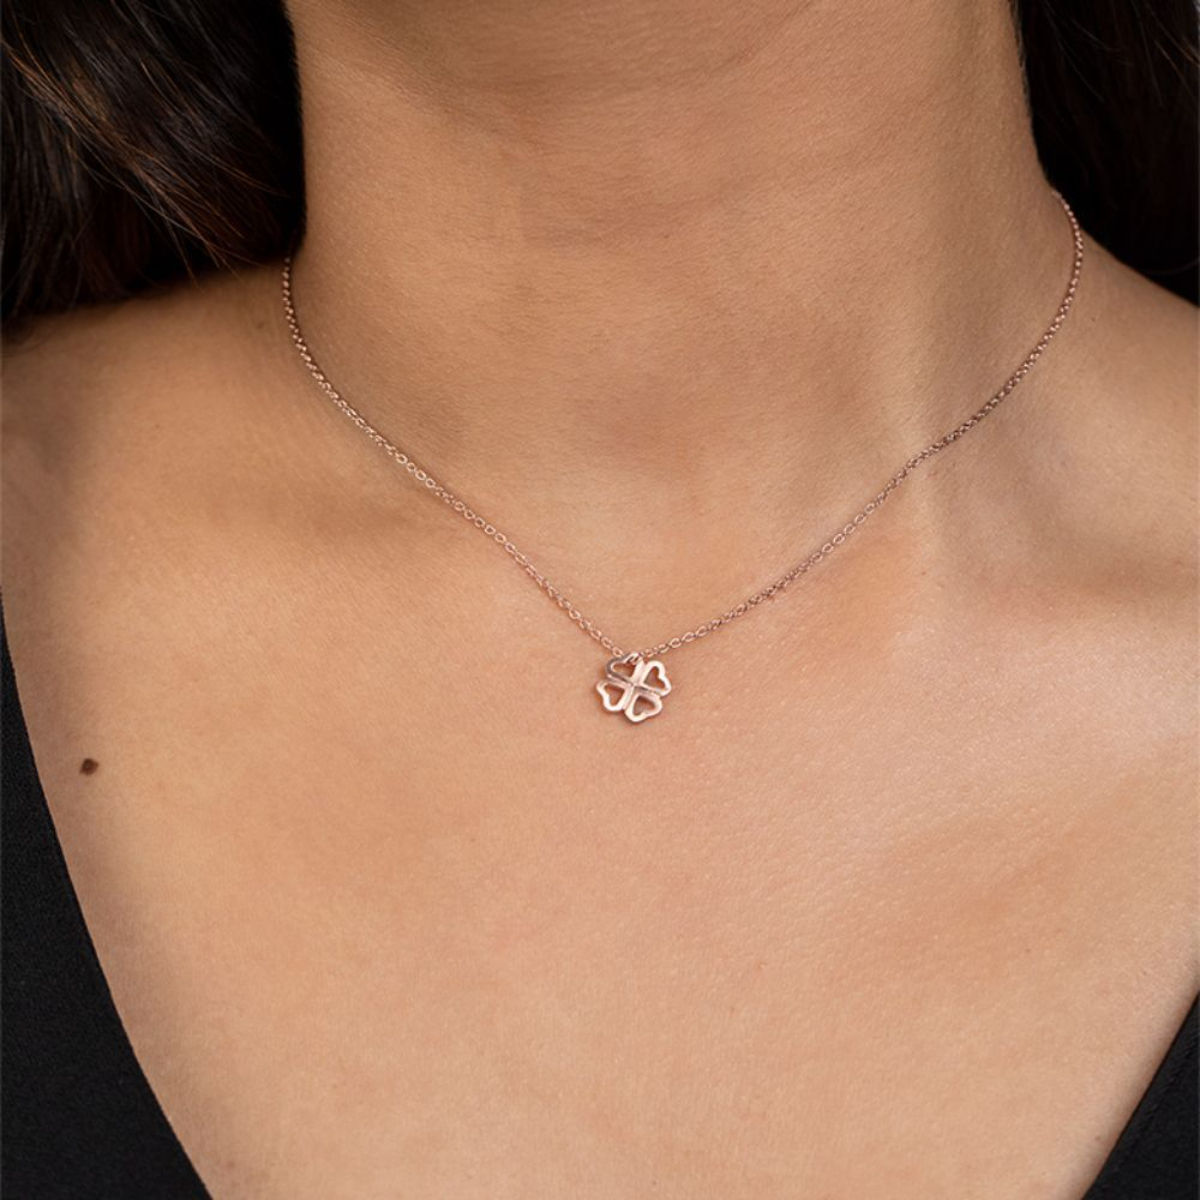 Shaya by CaratLane The Wing Woman Clover Charm Necklace